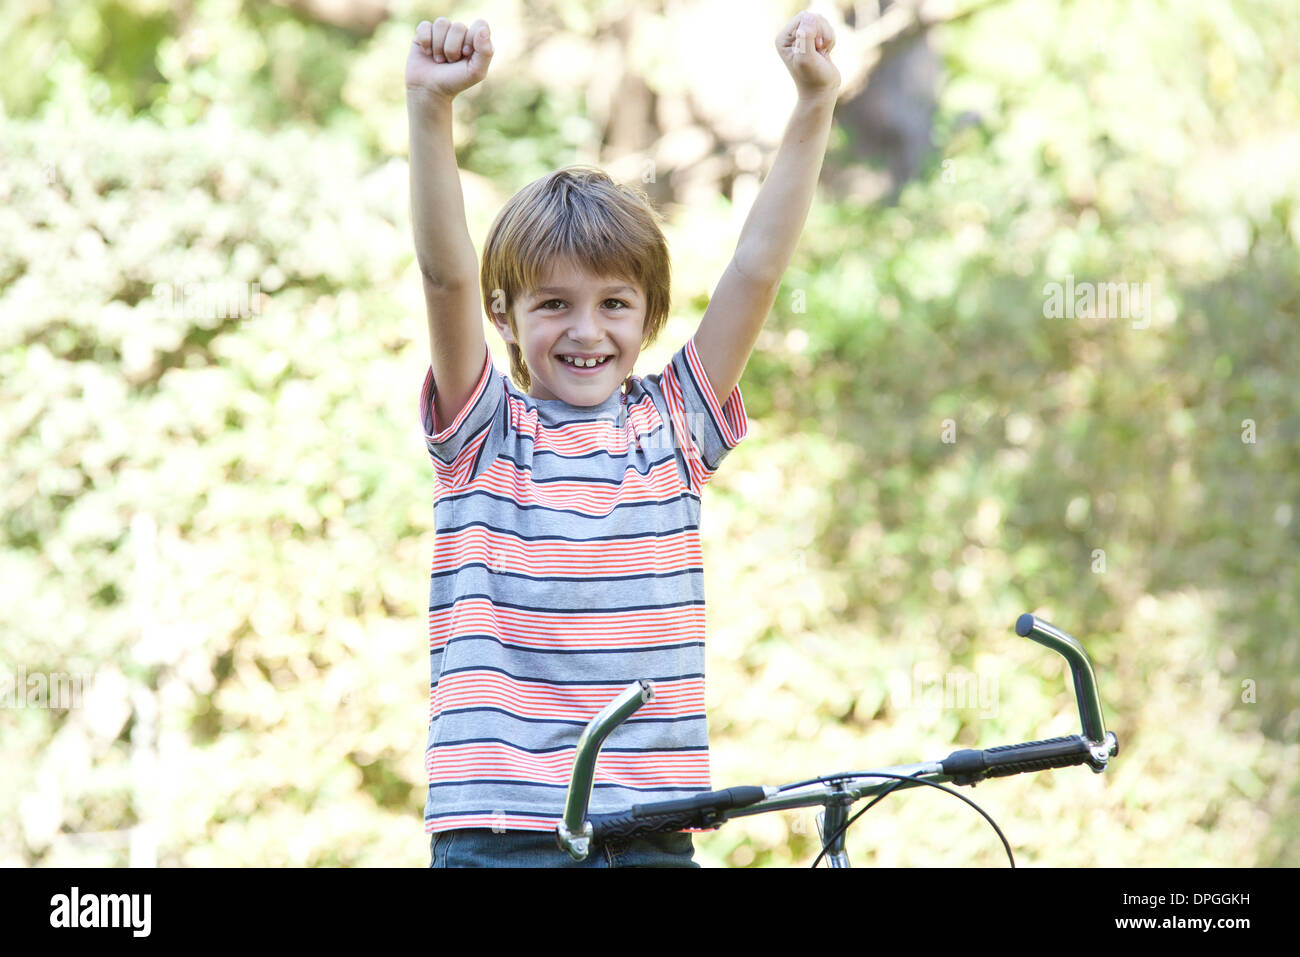 Boy riding bicycle, arms raised, portrait Stock Photo